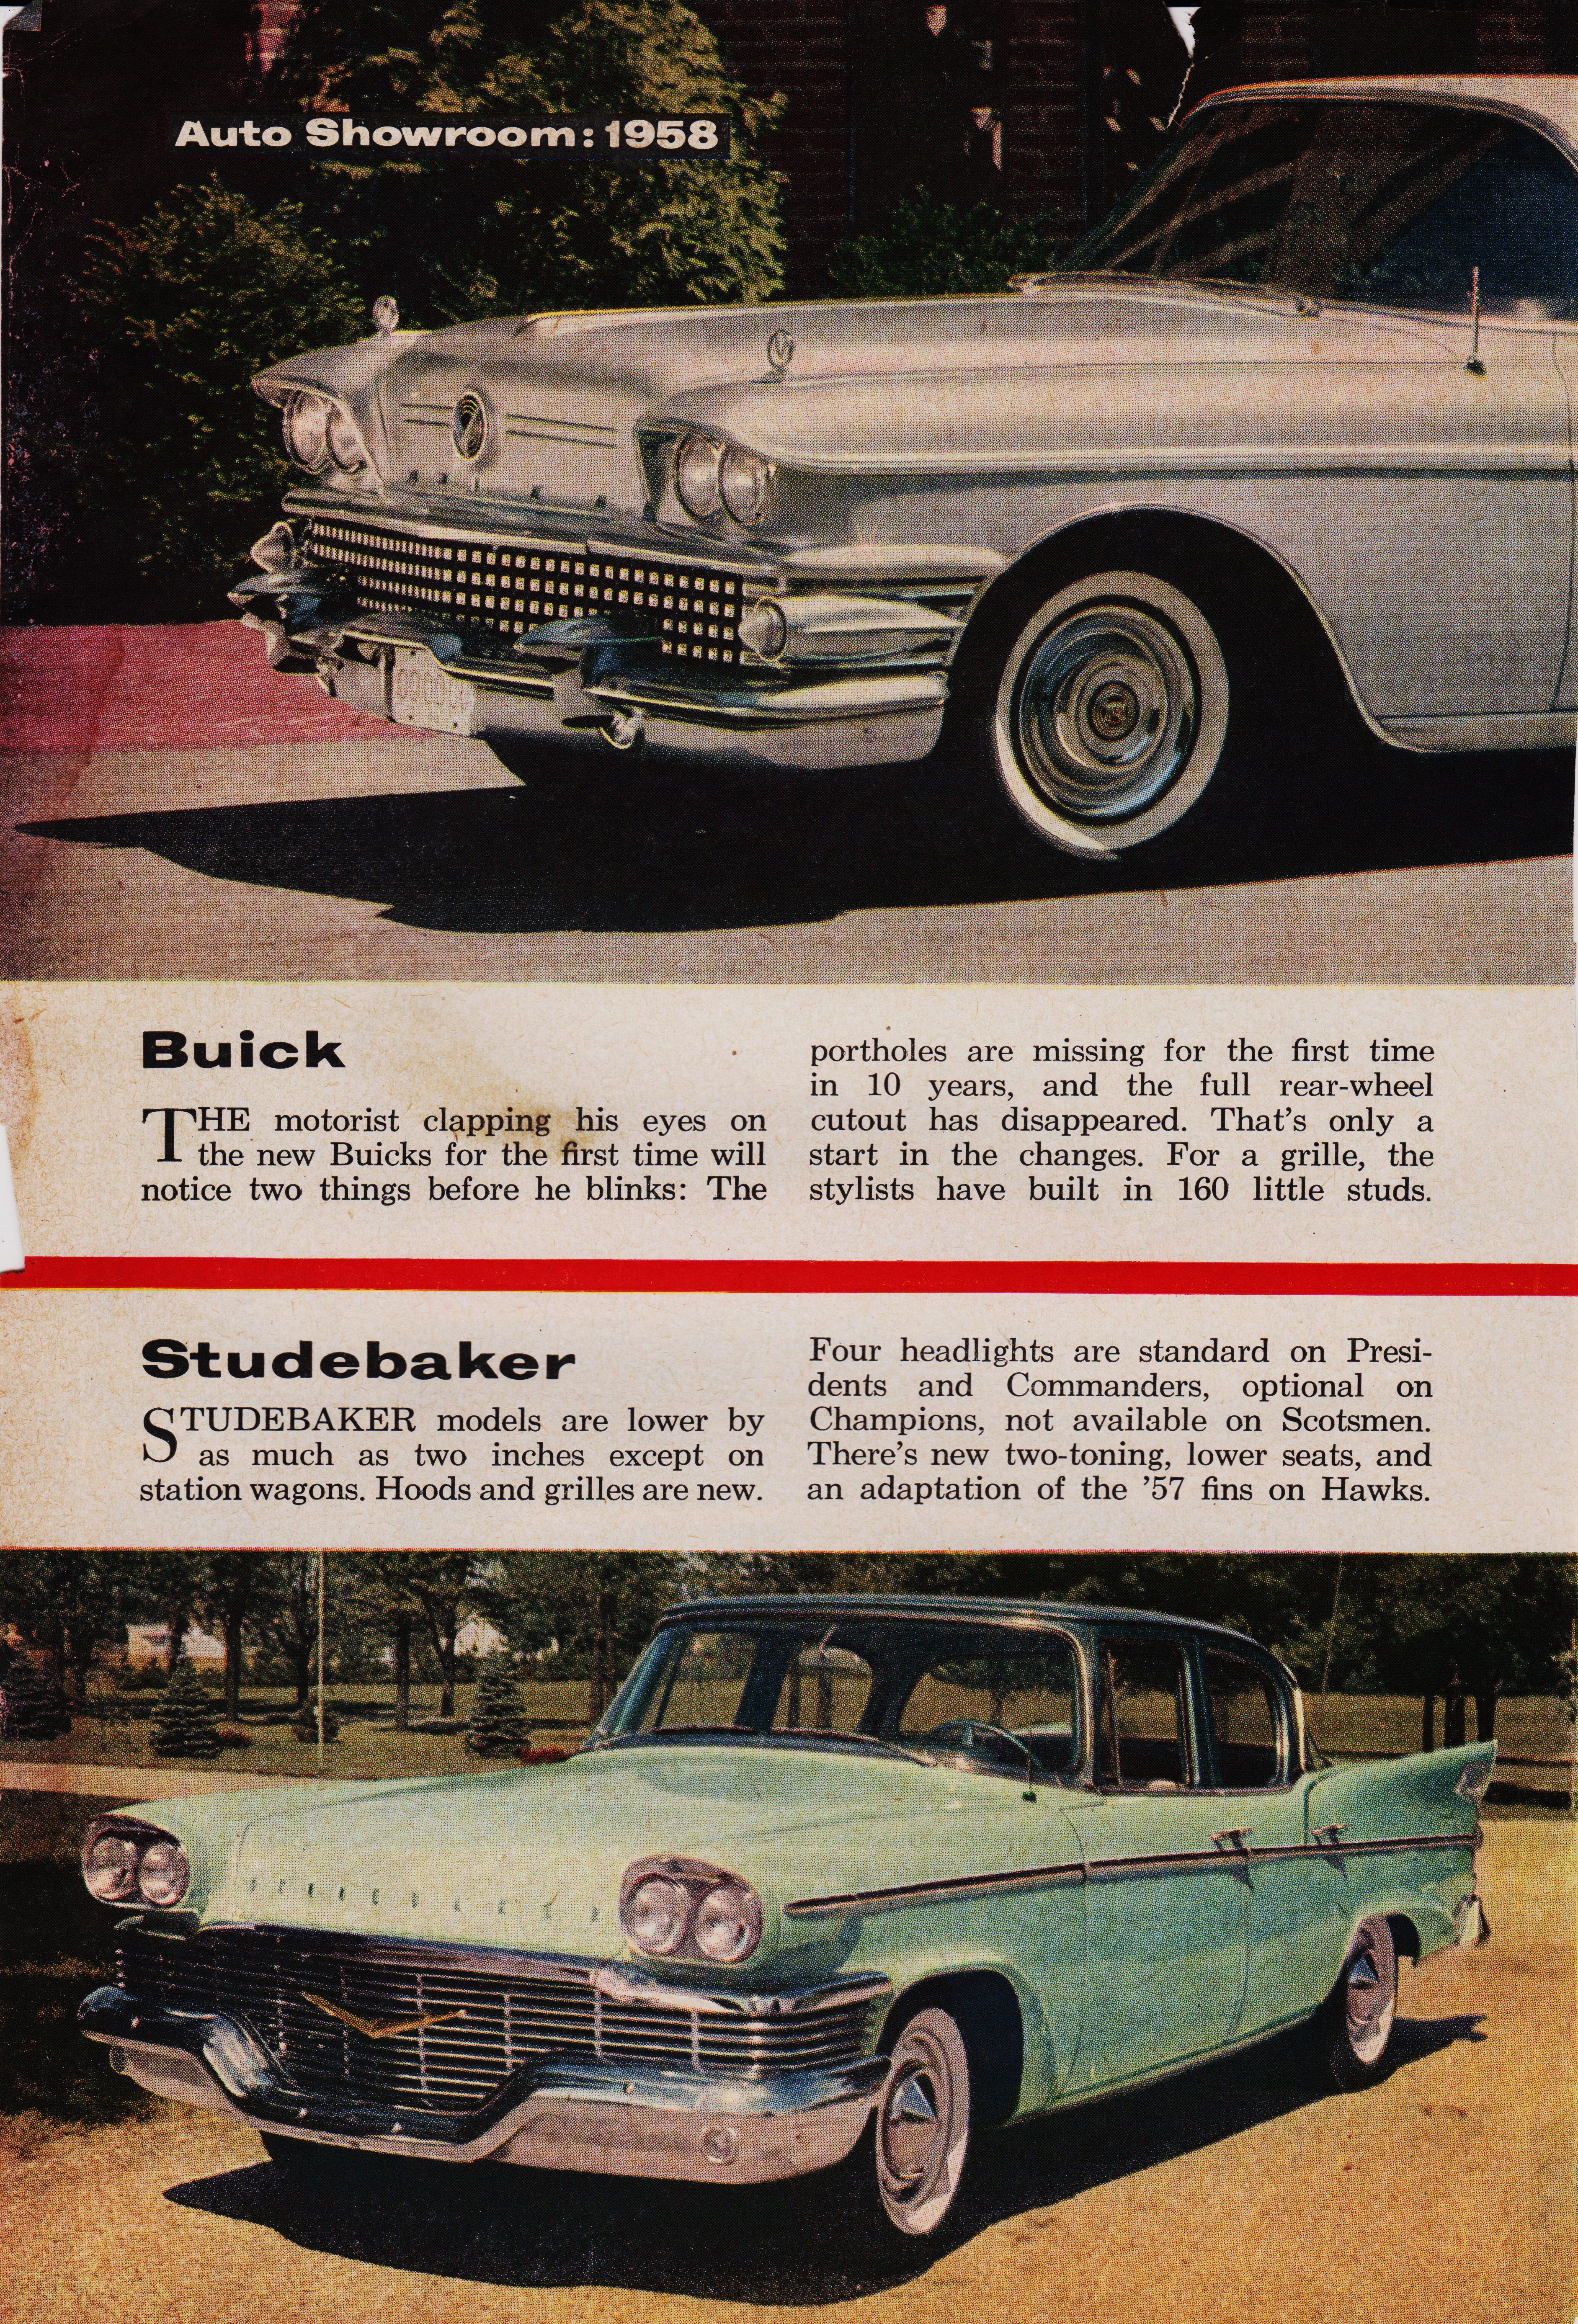 https://antiquemachinery.com/images-Popular-Science/Scientific-American-1958-buick-packard-lft.jpeg